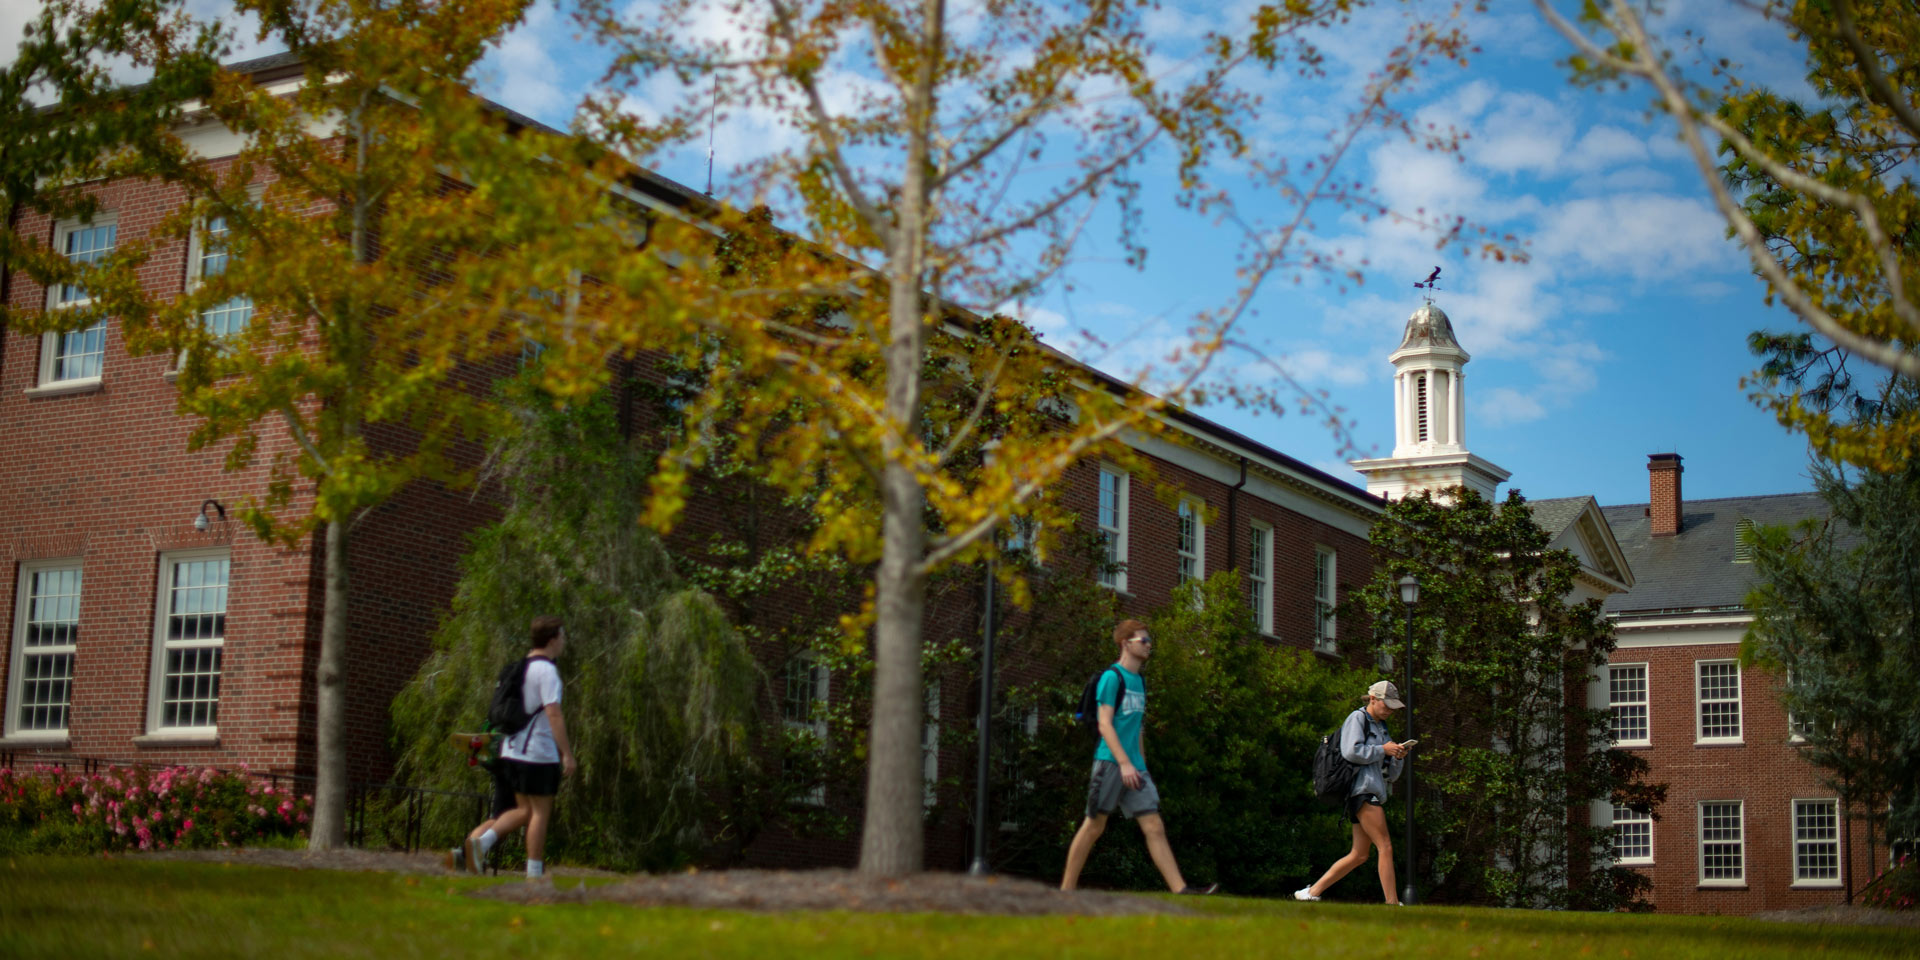 Exterior photo of Hoggard Hall with students walking in the foreground